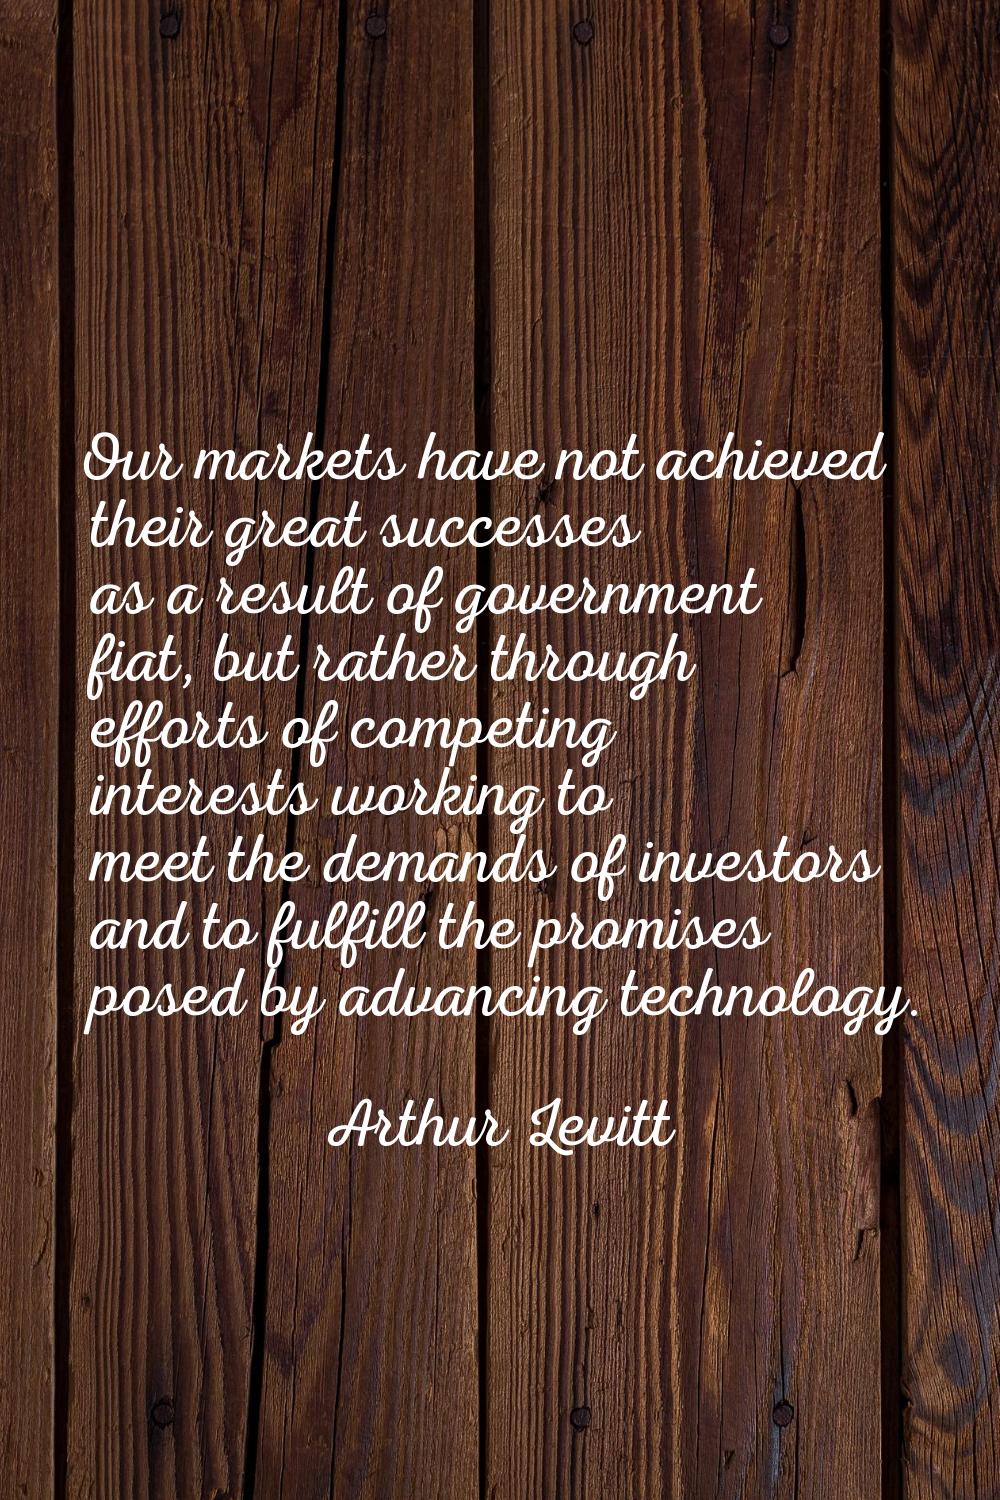 Our markets have not achieved their great successes as a result of government fiat, but rather thro